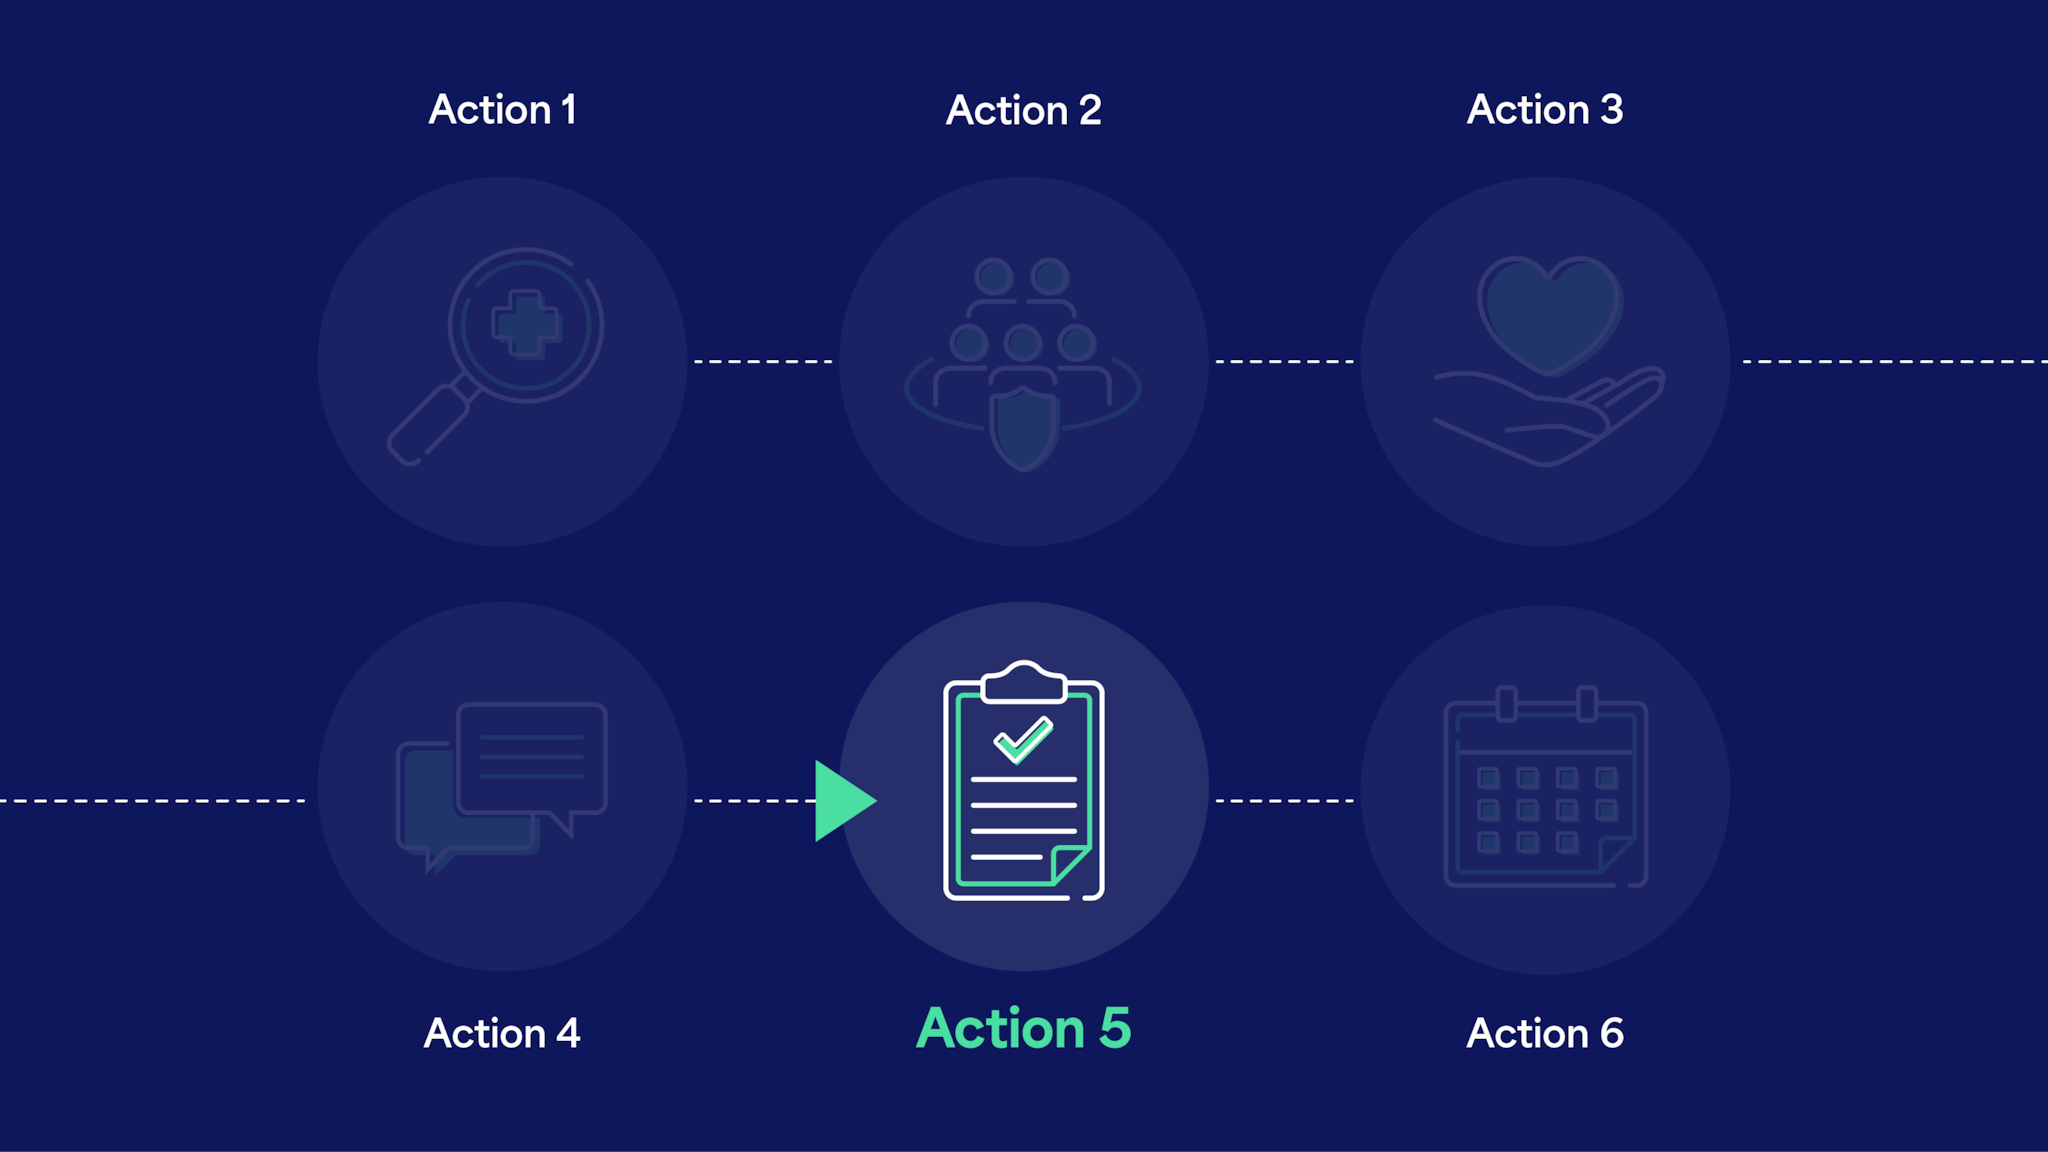 Action 5 in a six-step sequence. It has an icon of a clipboard with a checklist and large checkmark at the top.